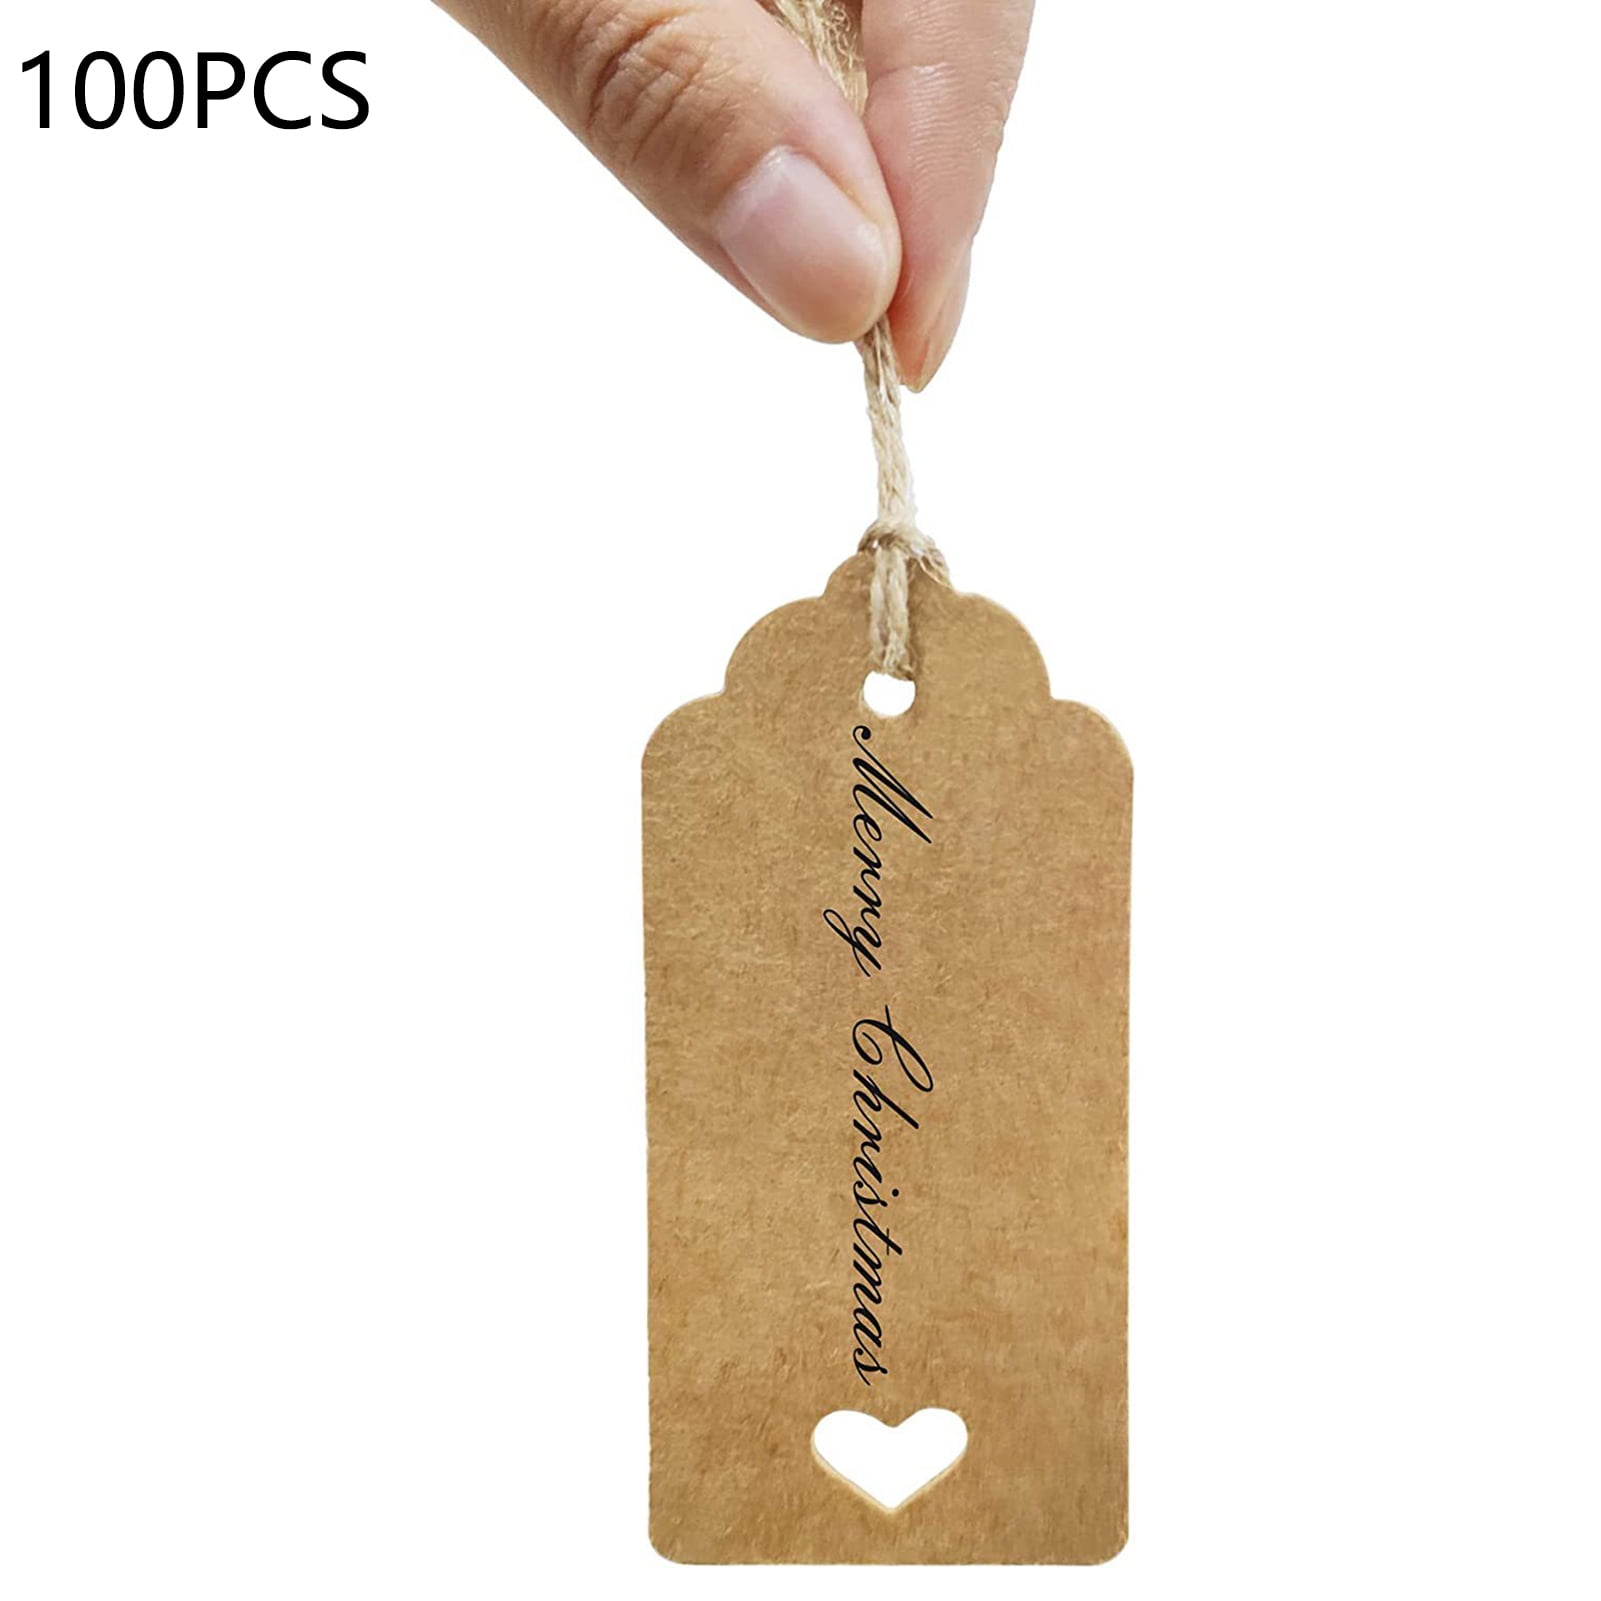 100pcs Brow/White/Black Paper Gift Sealing Label Cards With String